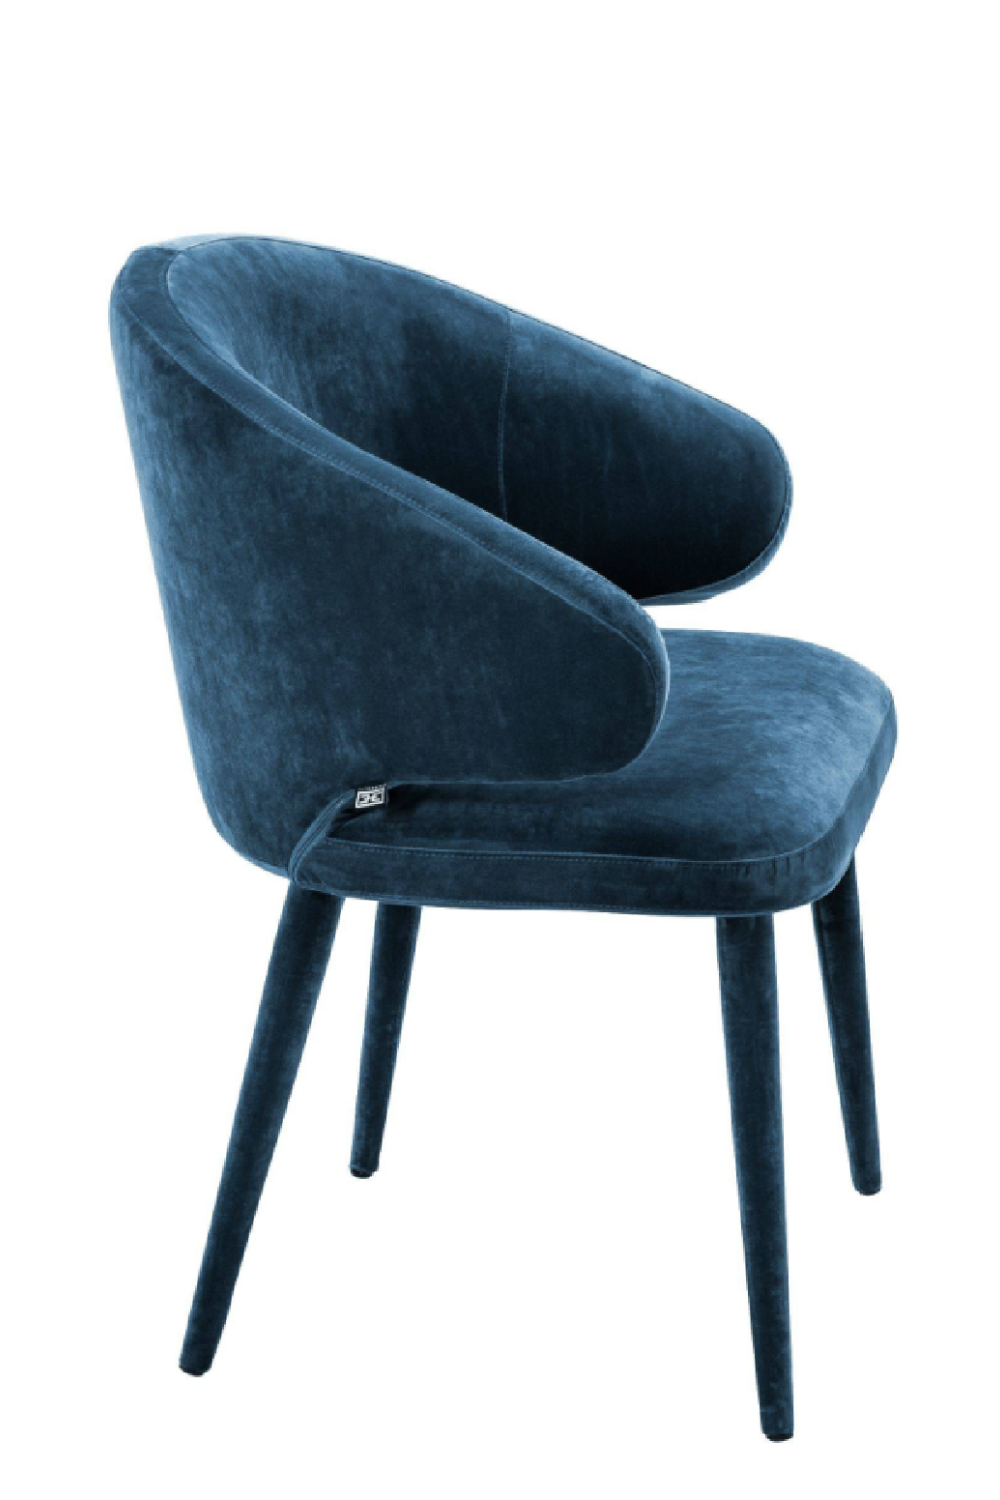 Curved Back Dining Chair | Eichholtz Cardinale | Oroa.com